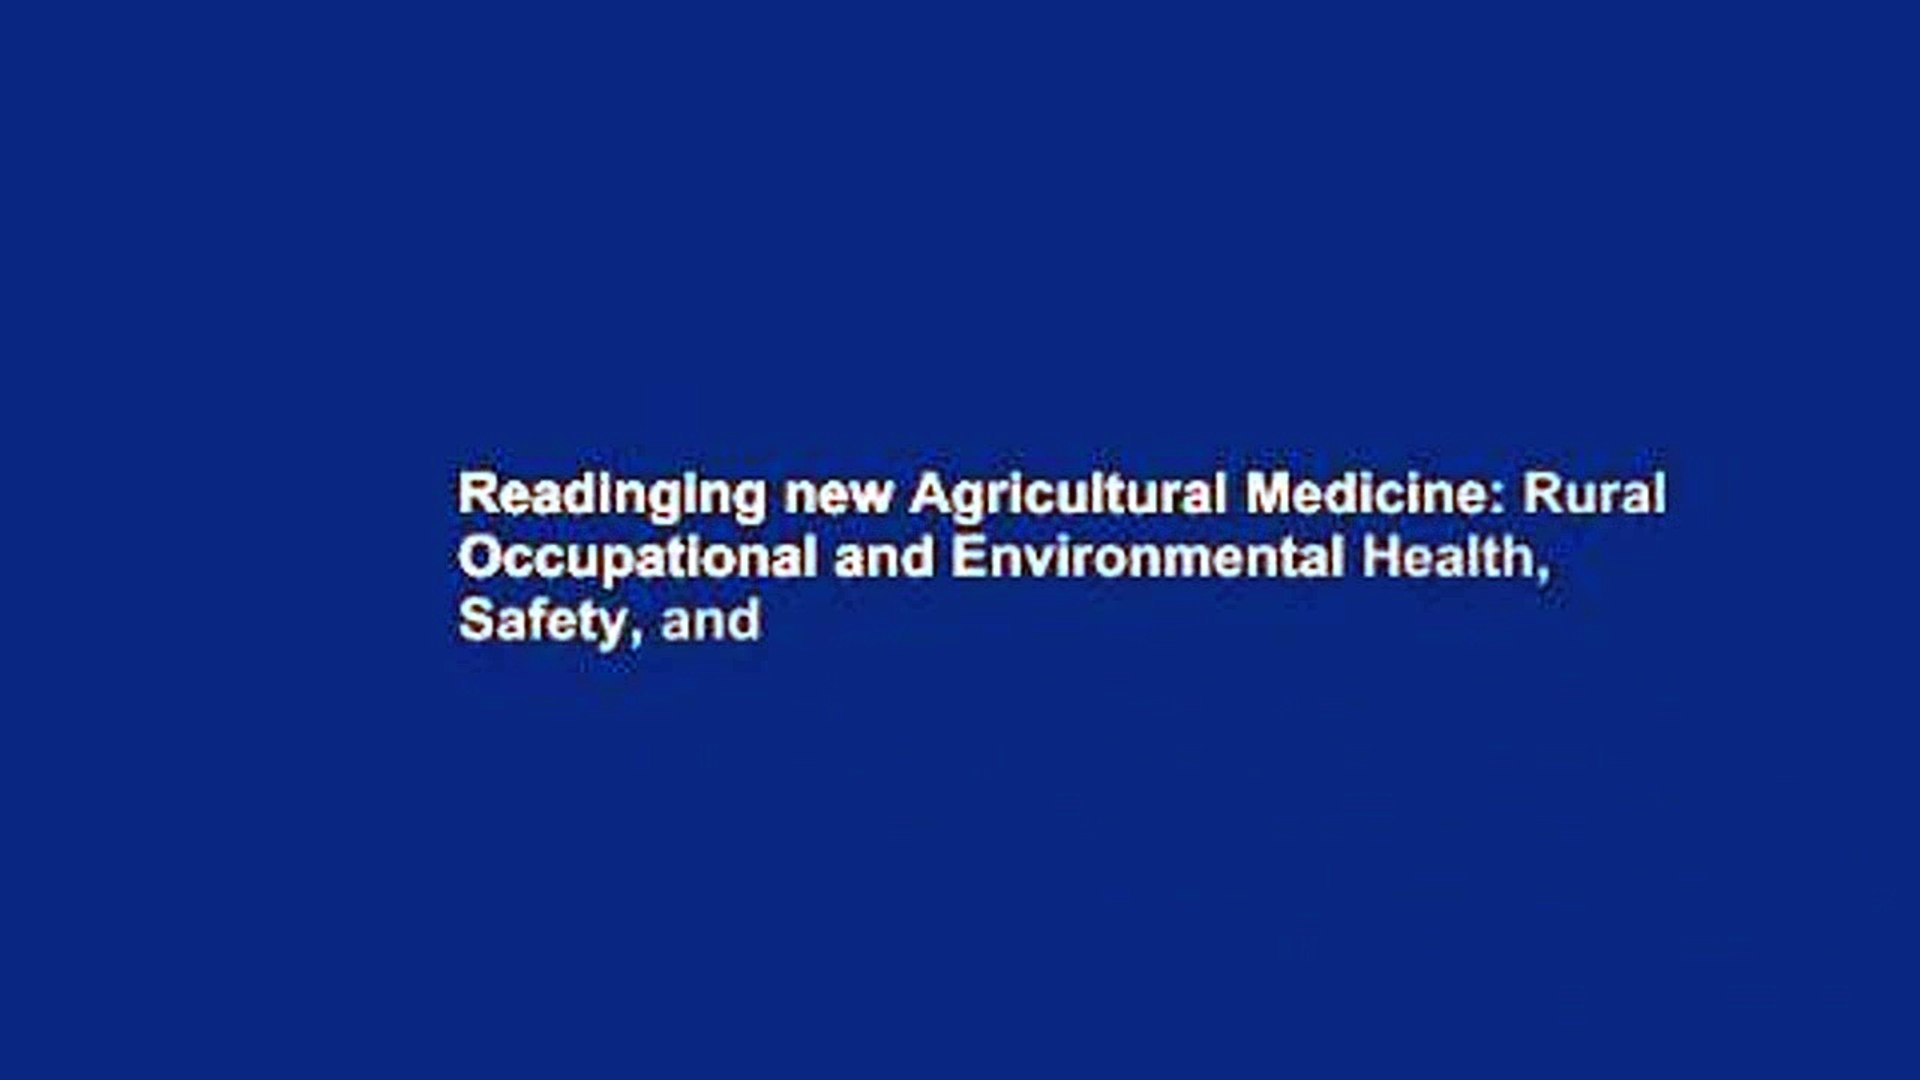 ⁣Readinging new Agricultural Medicine: Rural Occupational and Environmental Health, Safety, and